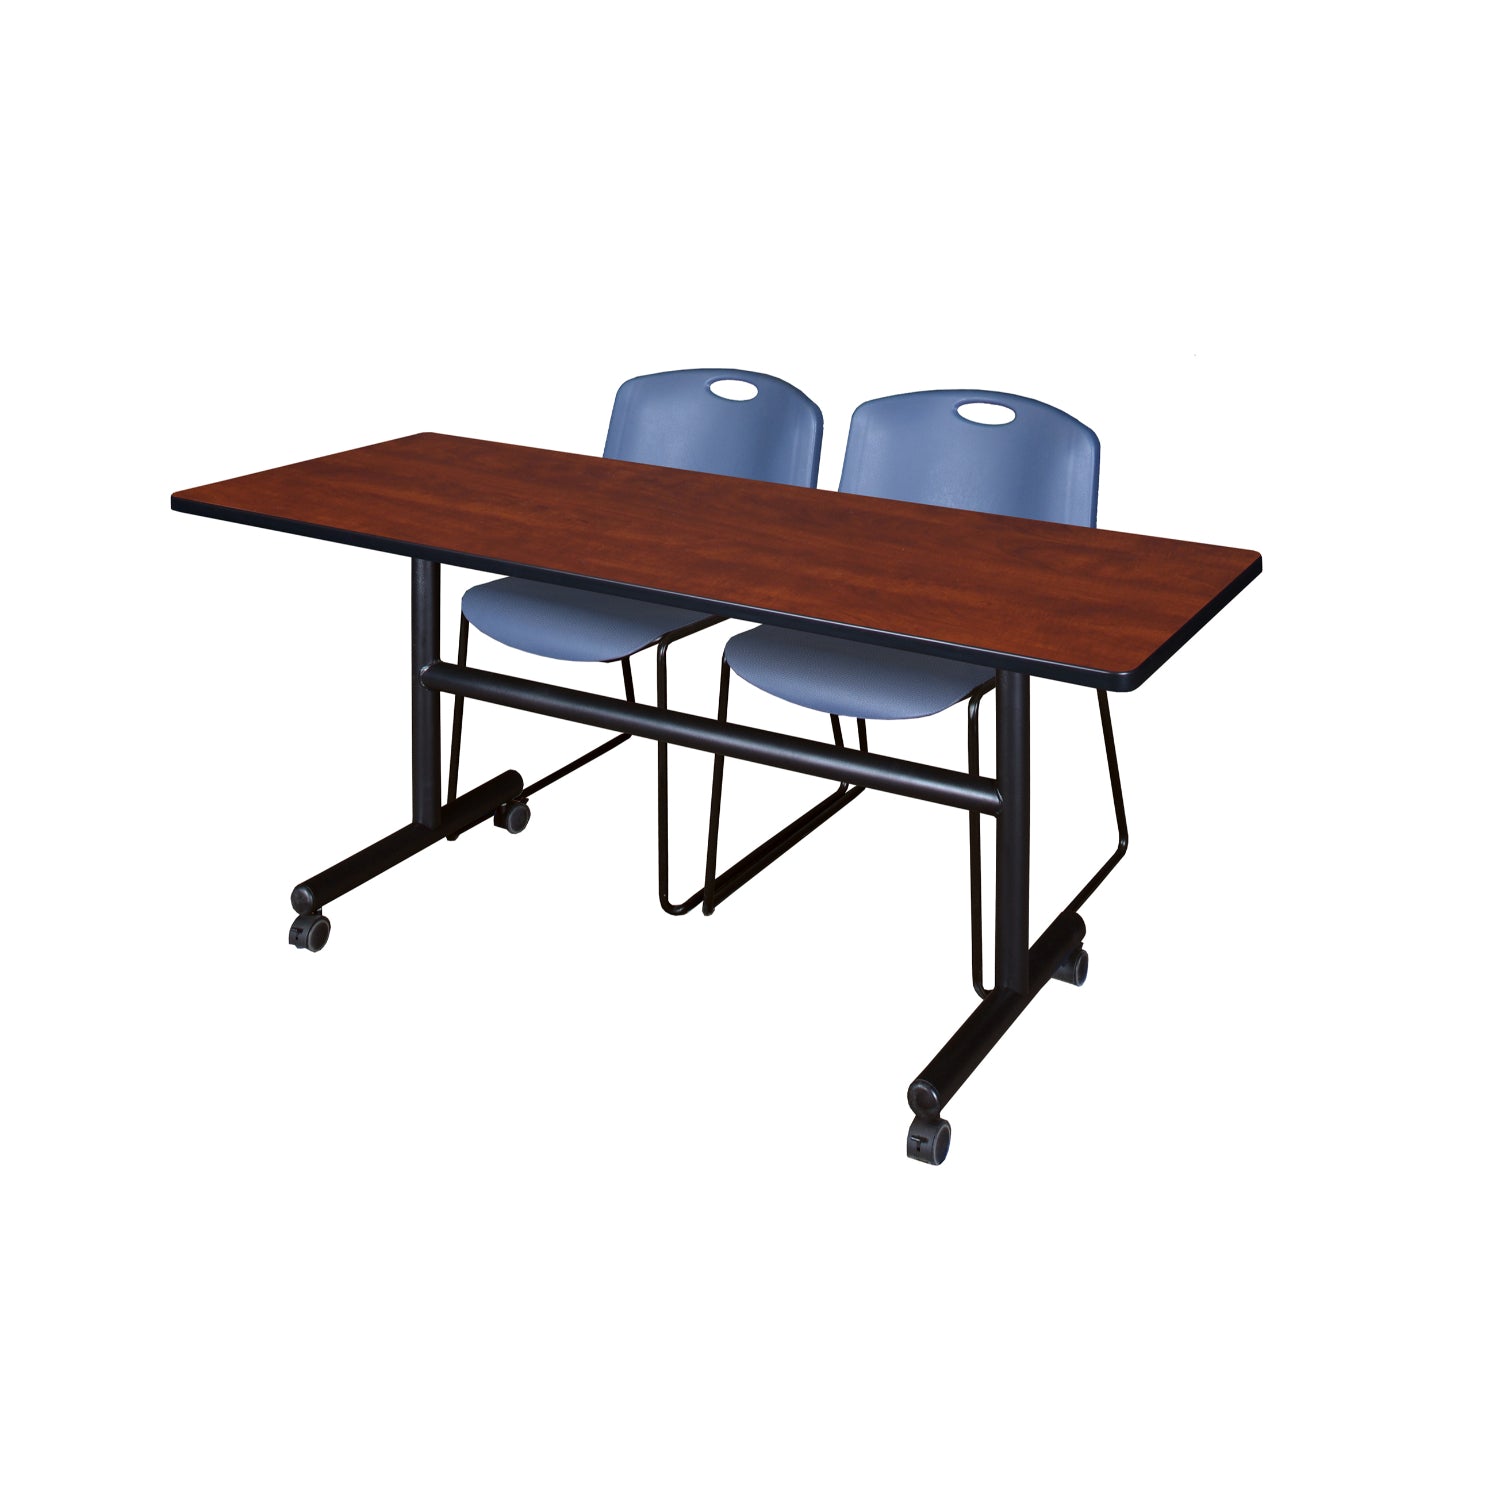 Kobe Flip Top Training Table and Chair Package, Kobe 60" x 30" Flip Top Mobile Nesting Table with 2 Zeng Stack Chairs